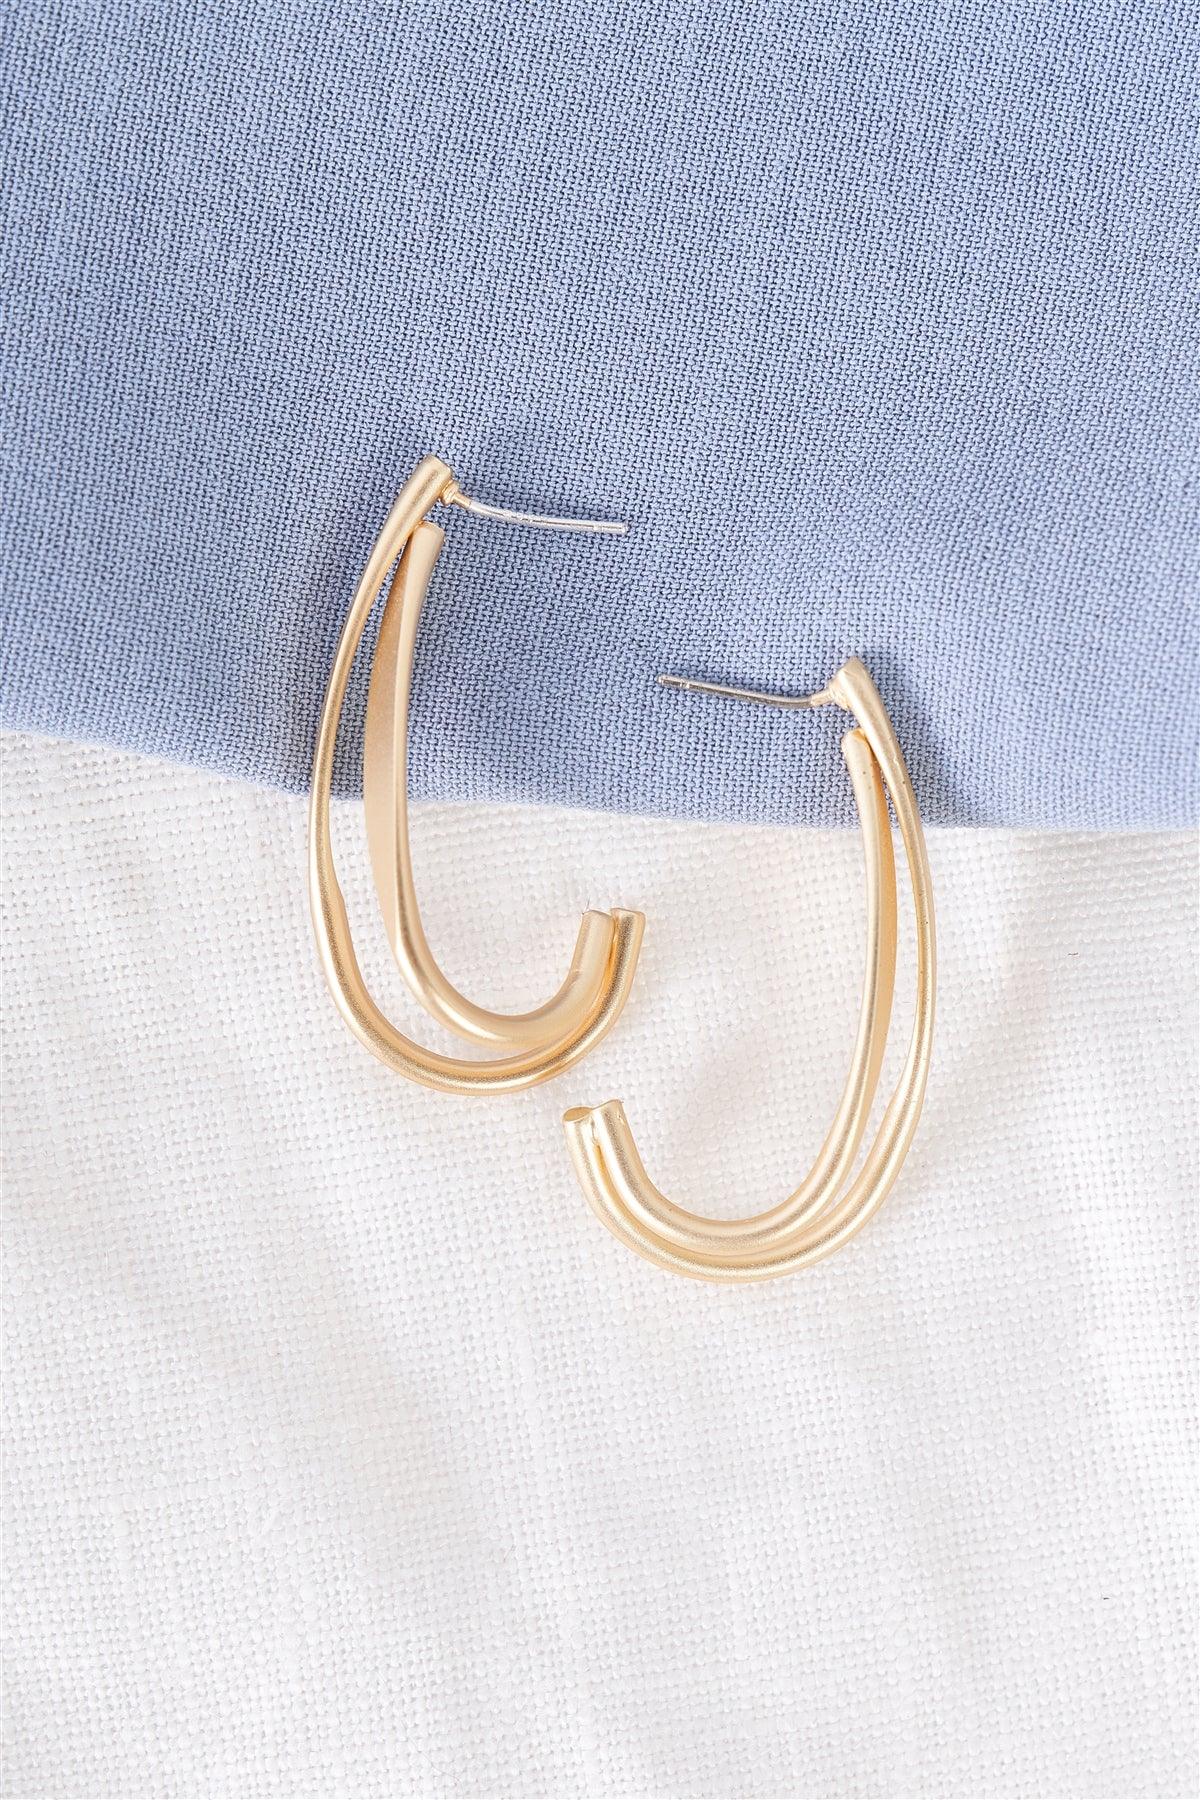 Gold Double Hook Earrings / 3 Pairs